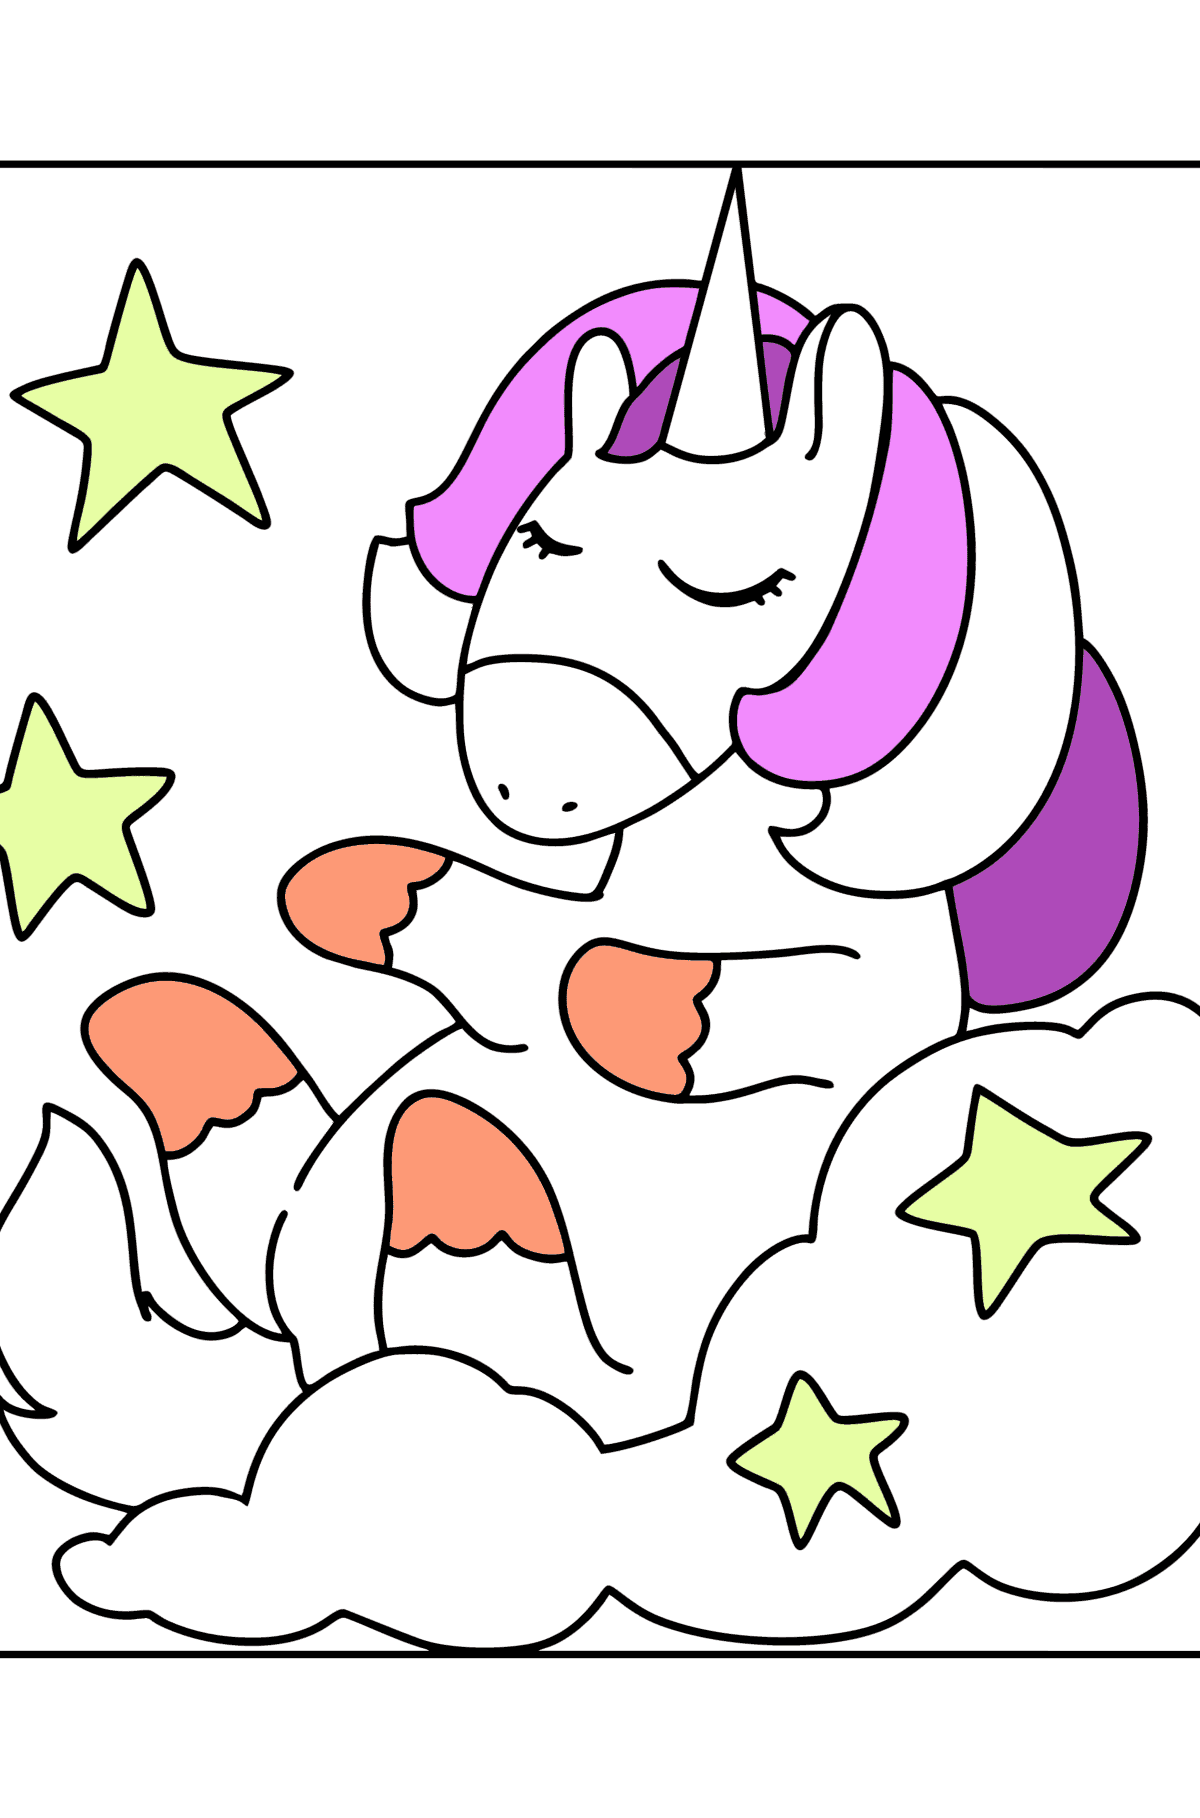 Funny unicorn coloring page - Coloring Pages for Kids